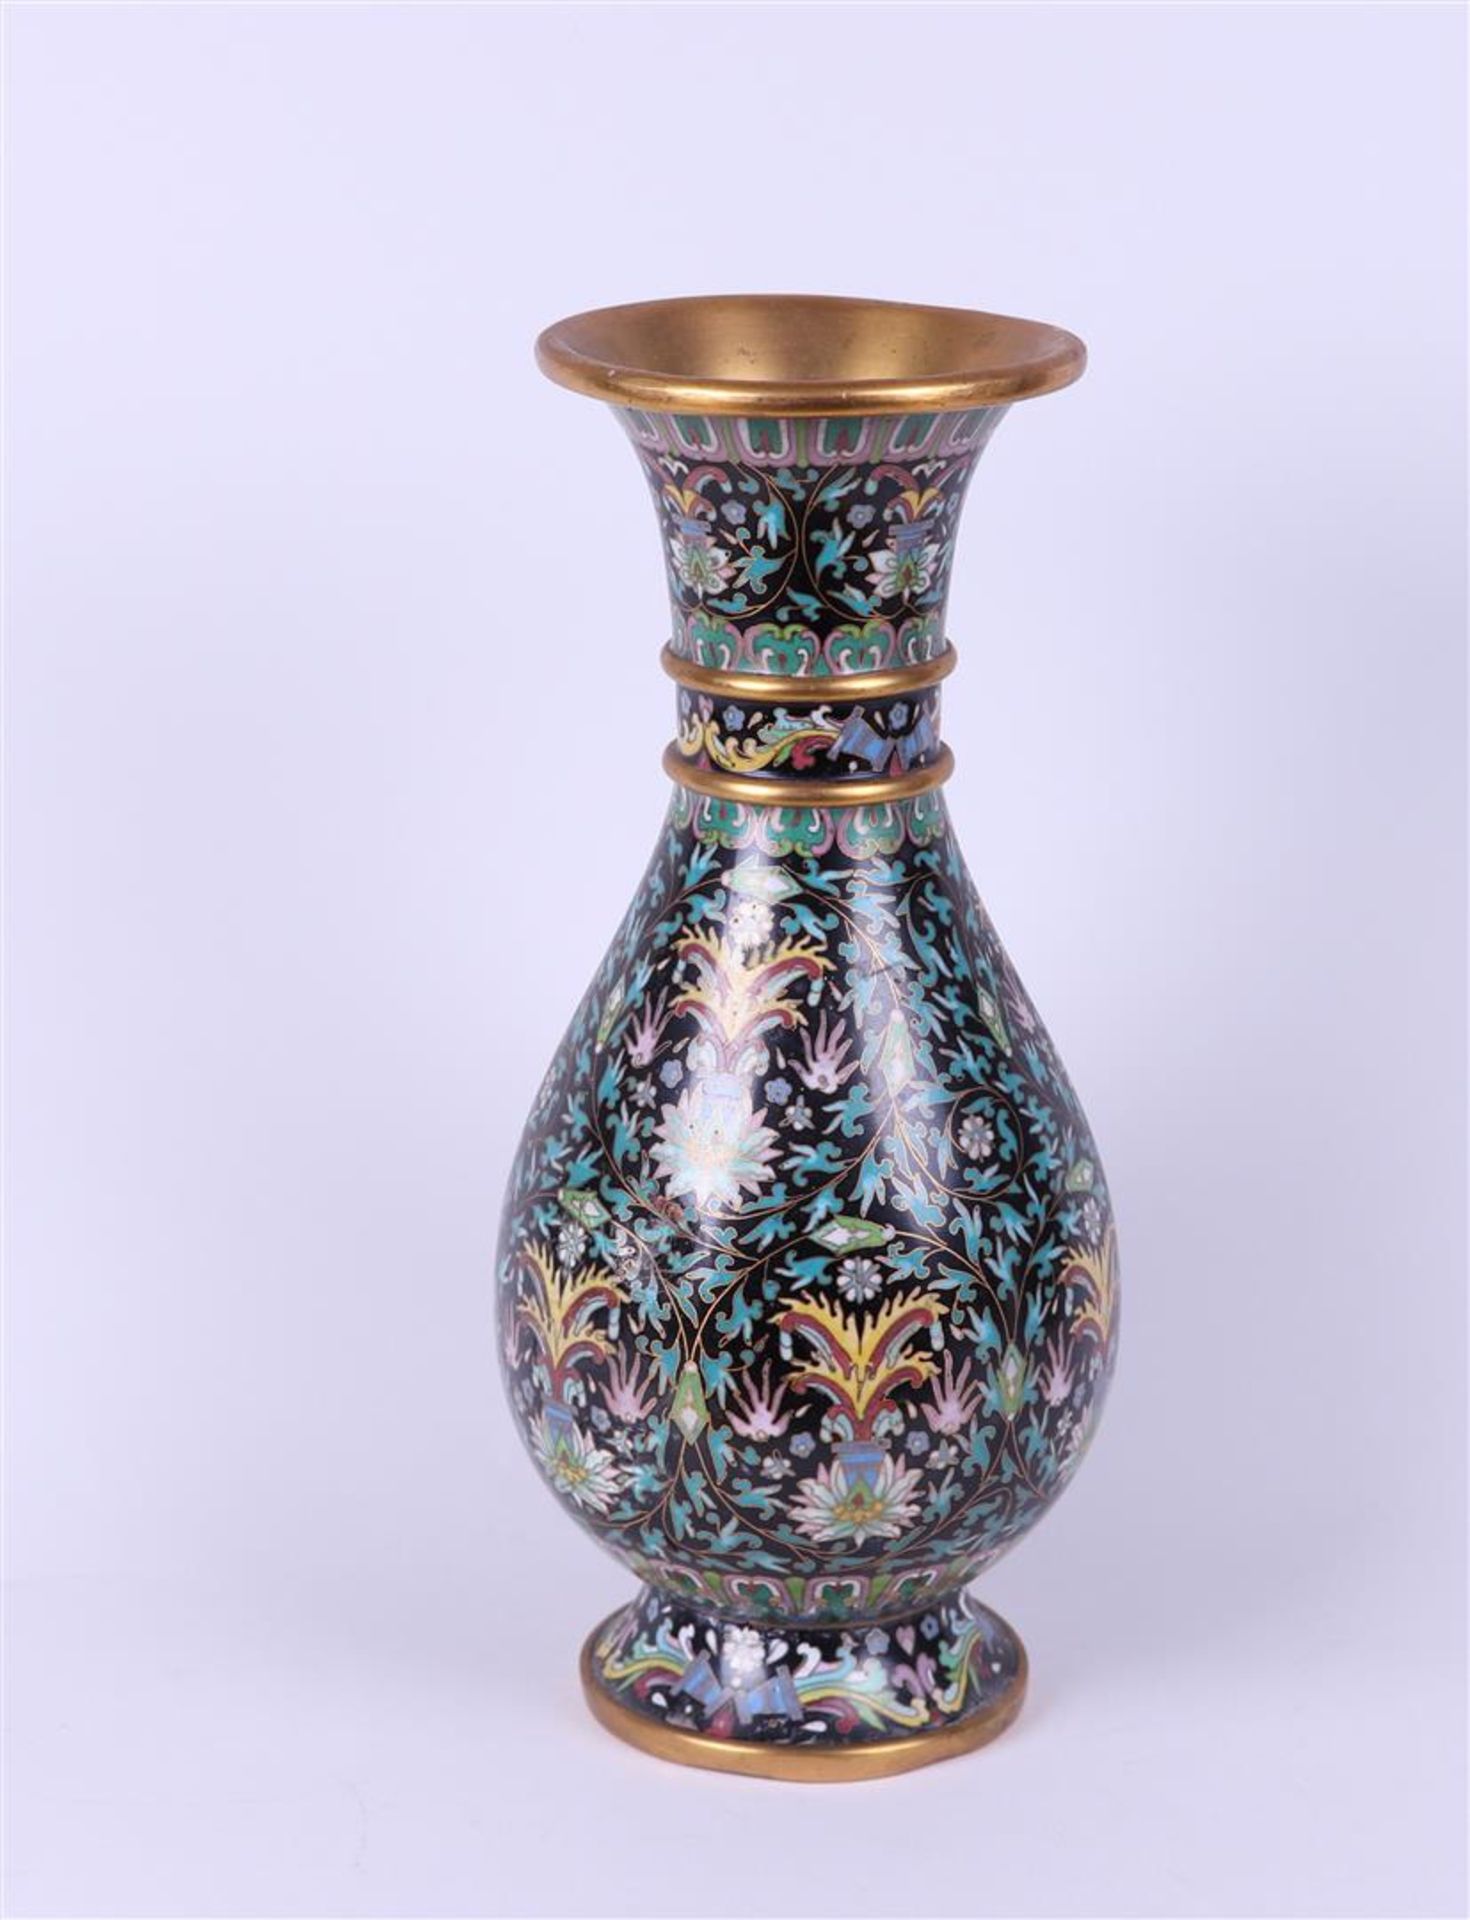 A cloisonne vase on a wooden base with floral decor. China, 20th century.
 - Image 2 of 4